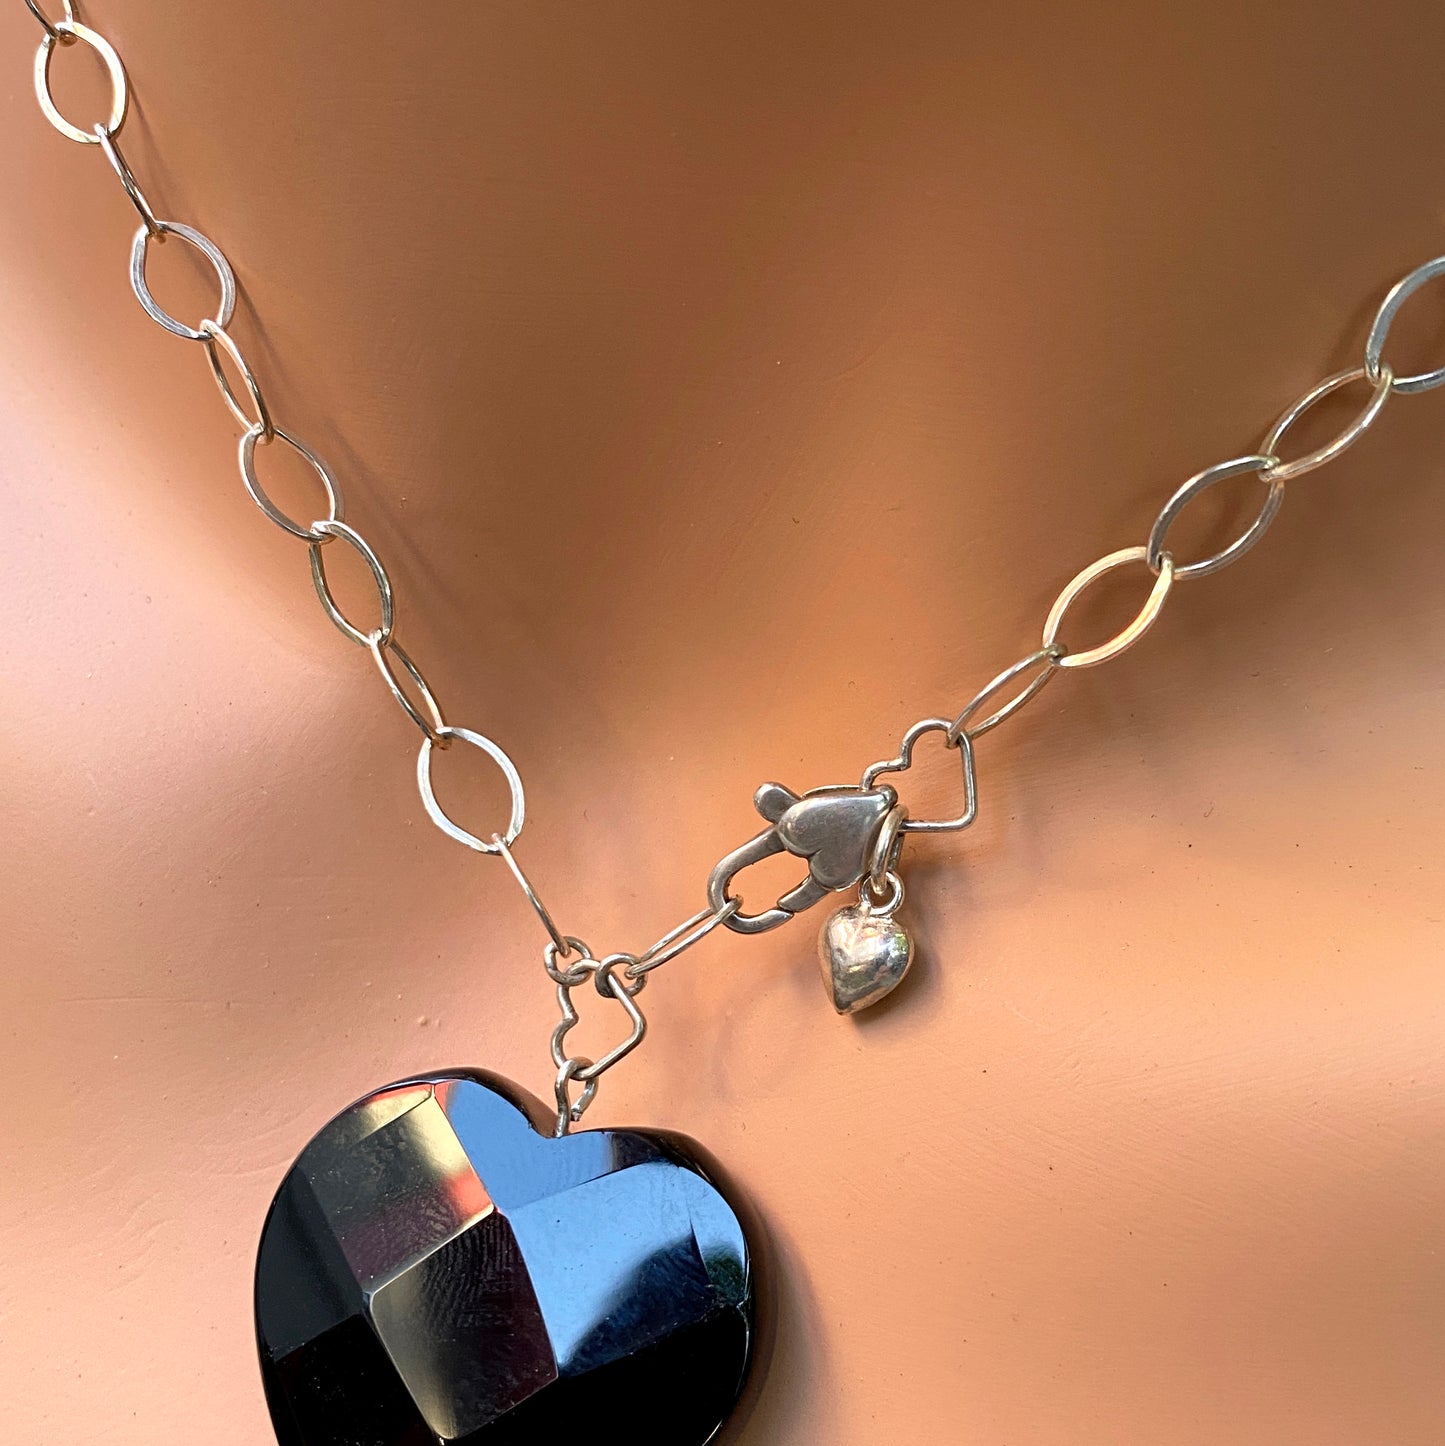 Black Onyx Faceted Heart Pendant w/ Labradorite on Sterling Silver Chain